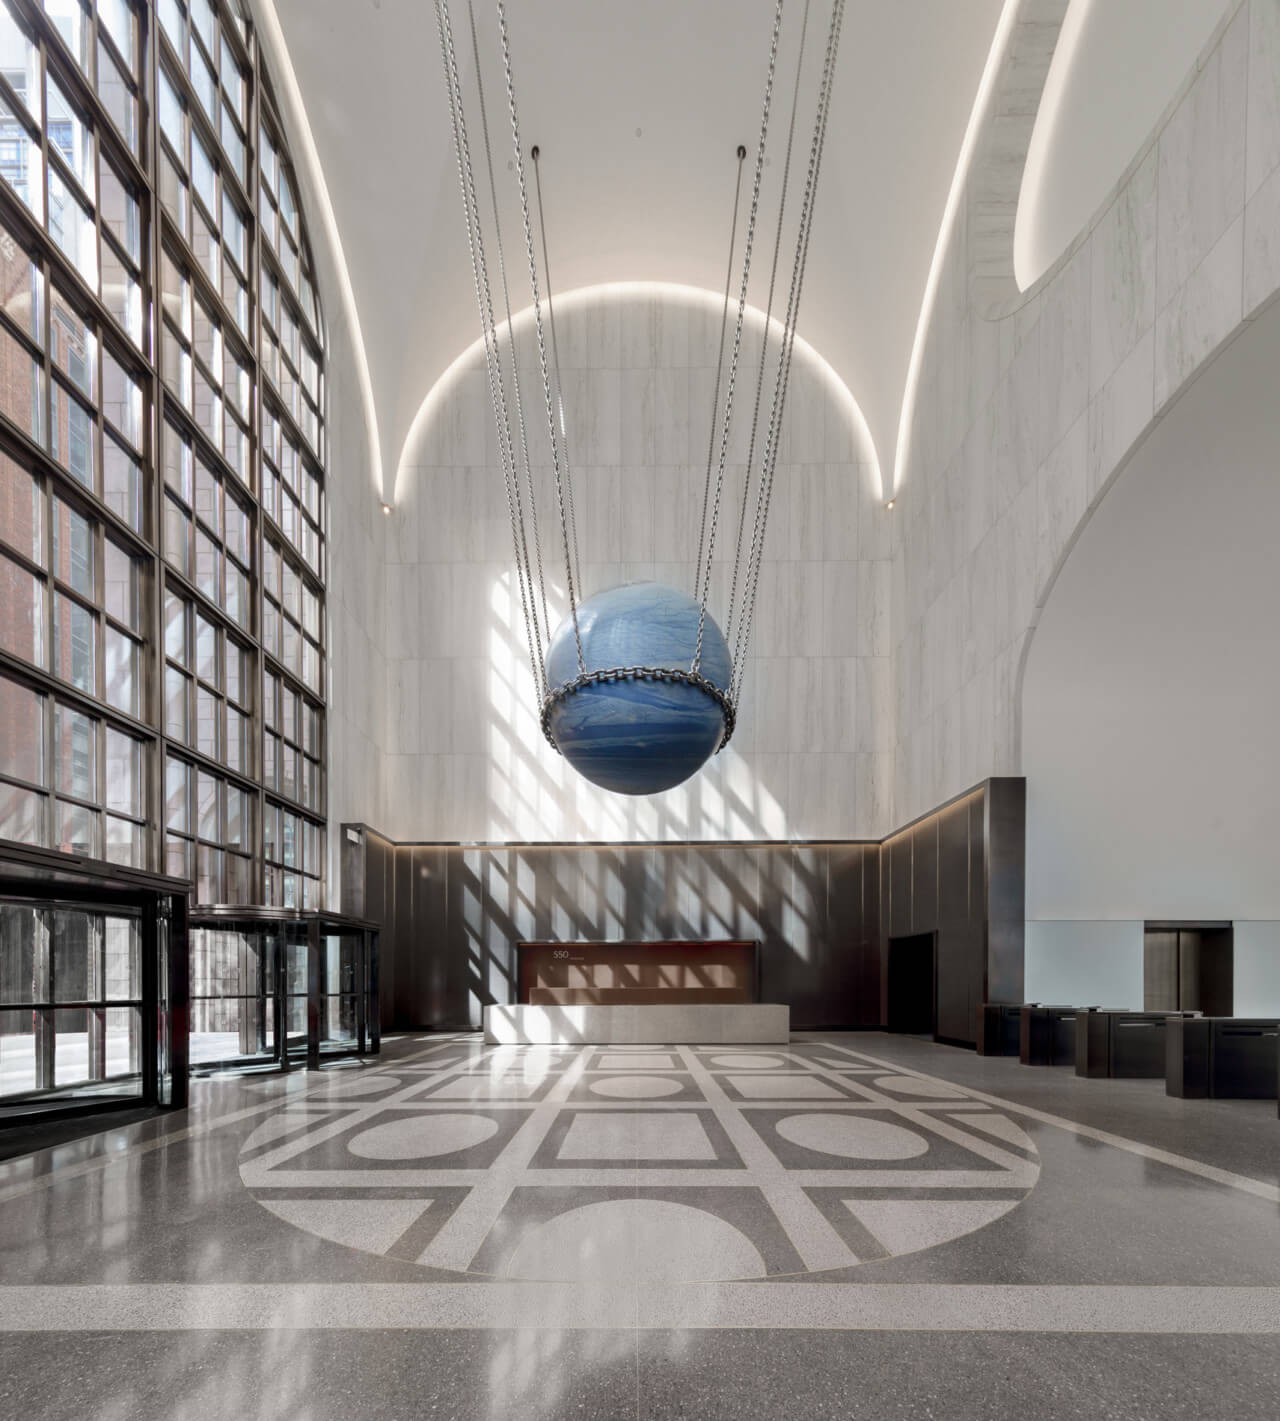 A blue sphere designed by alicja kwade hanging from the ceiling at 550 madison